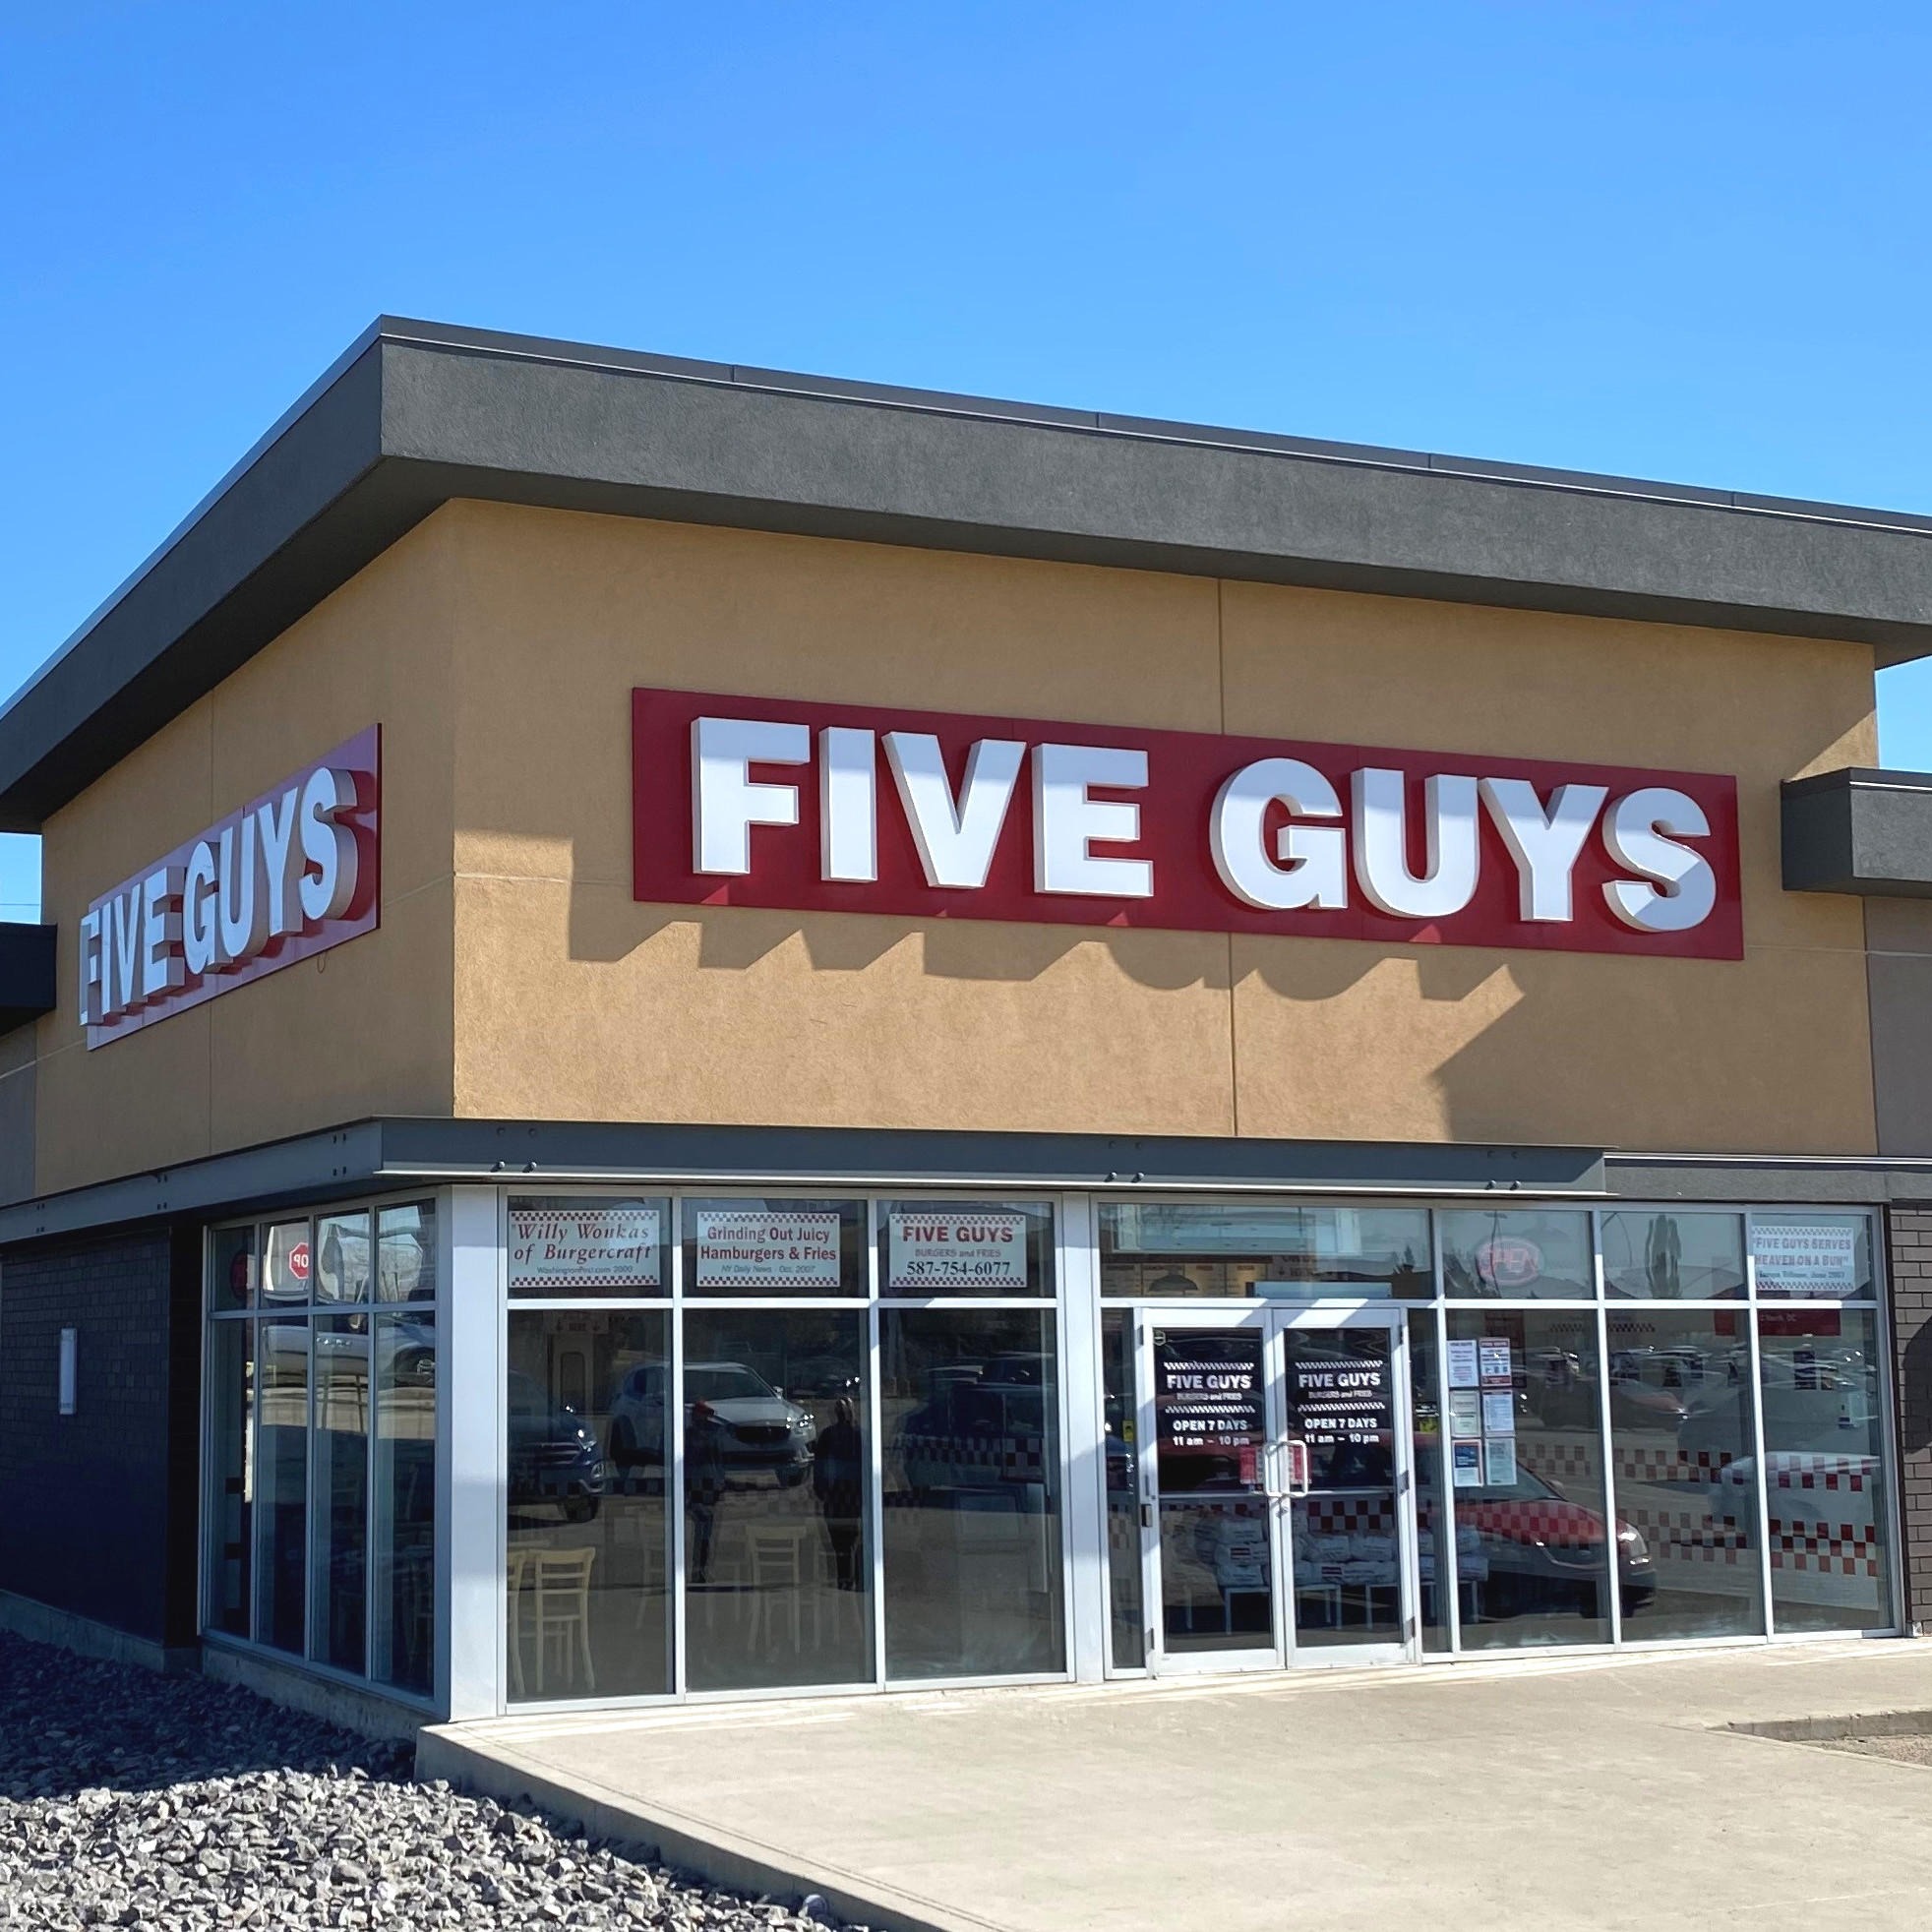 Five Guys at 5015 101 Ave. NW in Edmonton.